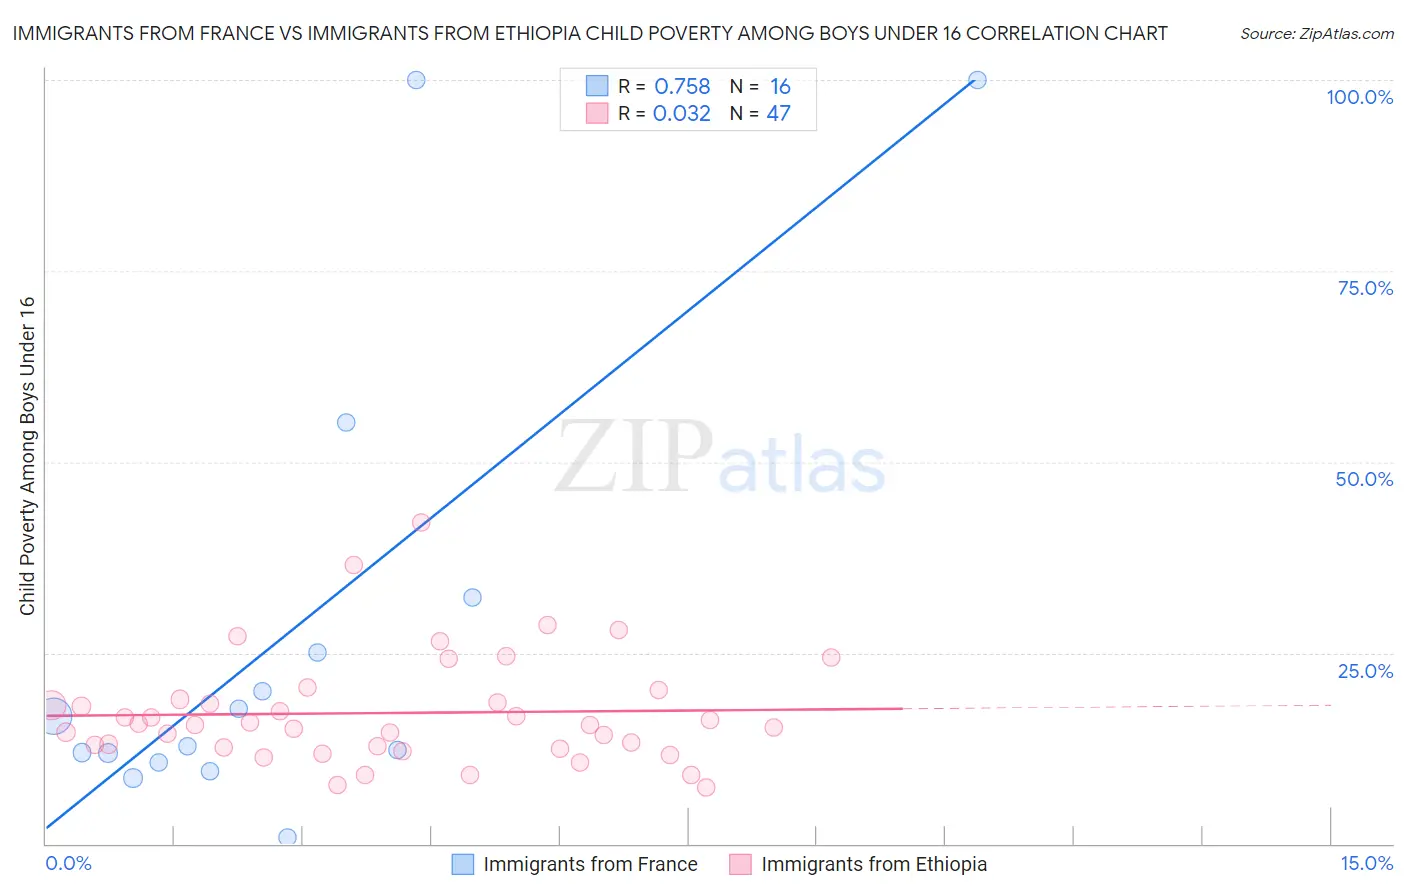 Immigrants from France vs Immigrants from Ethiopia Child Poverty Among Boys Under 16